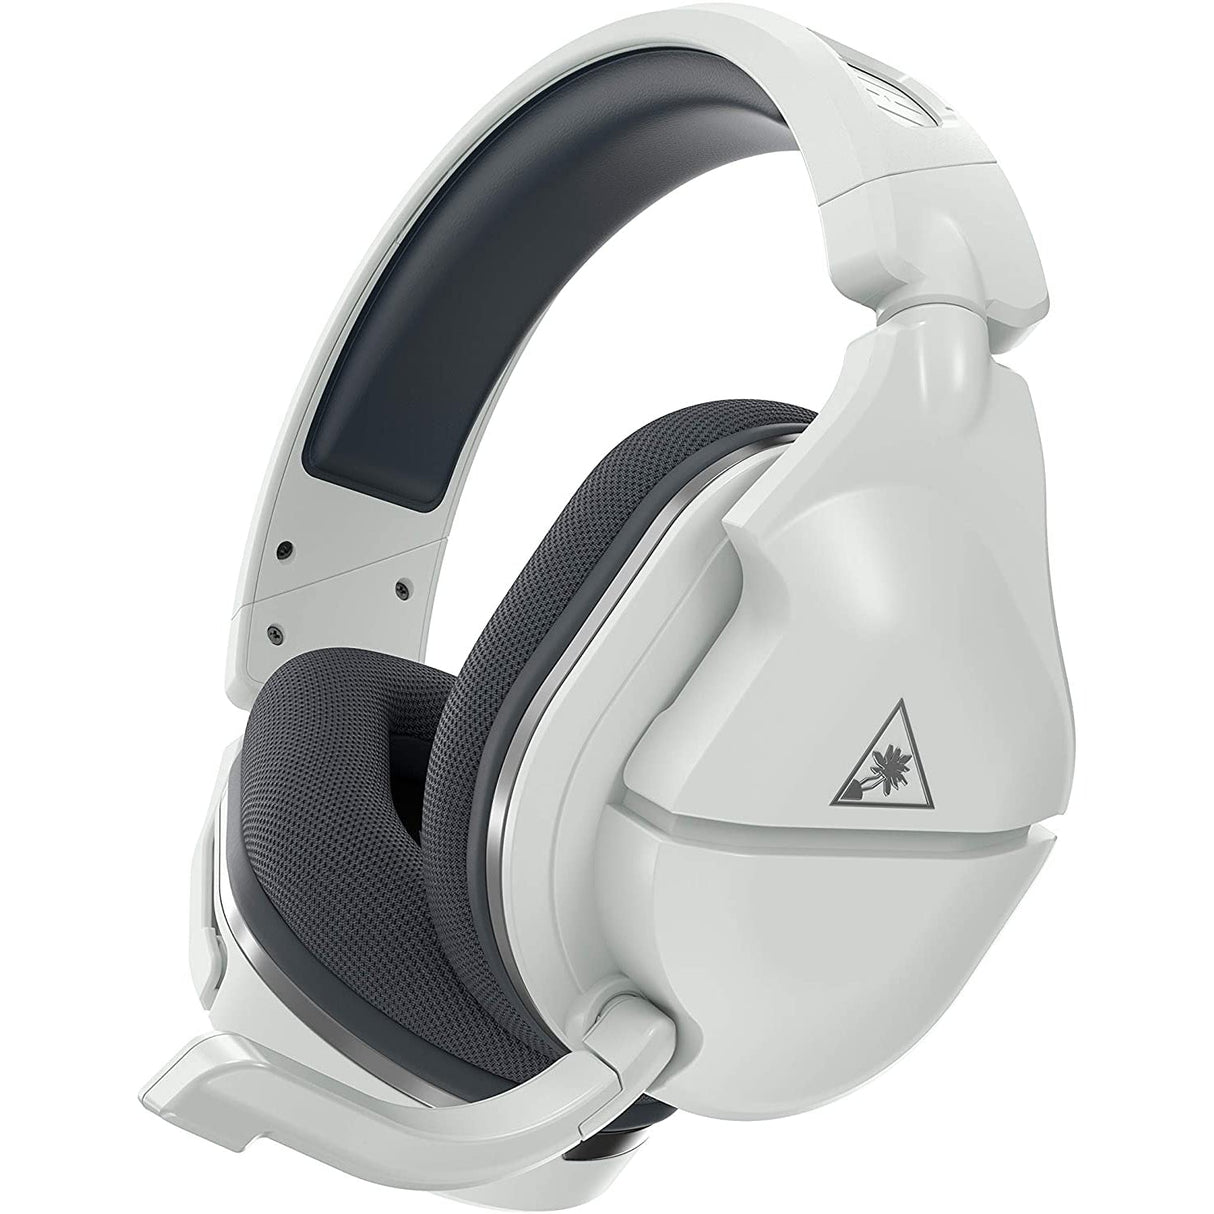 Turtle Beach Stealth 600 Gen 2 Gaming Headset for Xbox, White - Refurbished Excellent